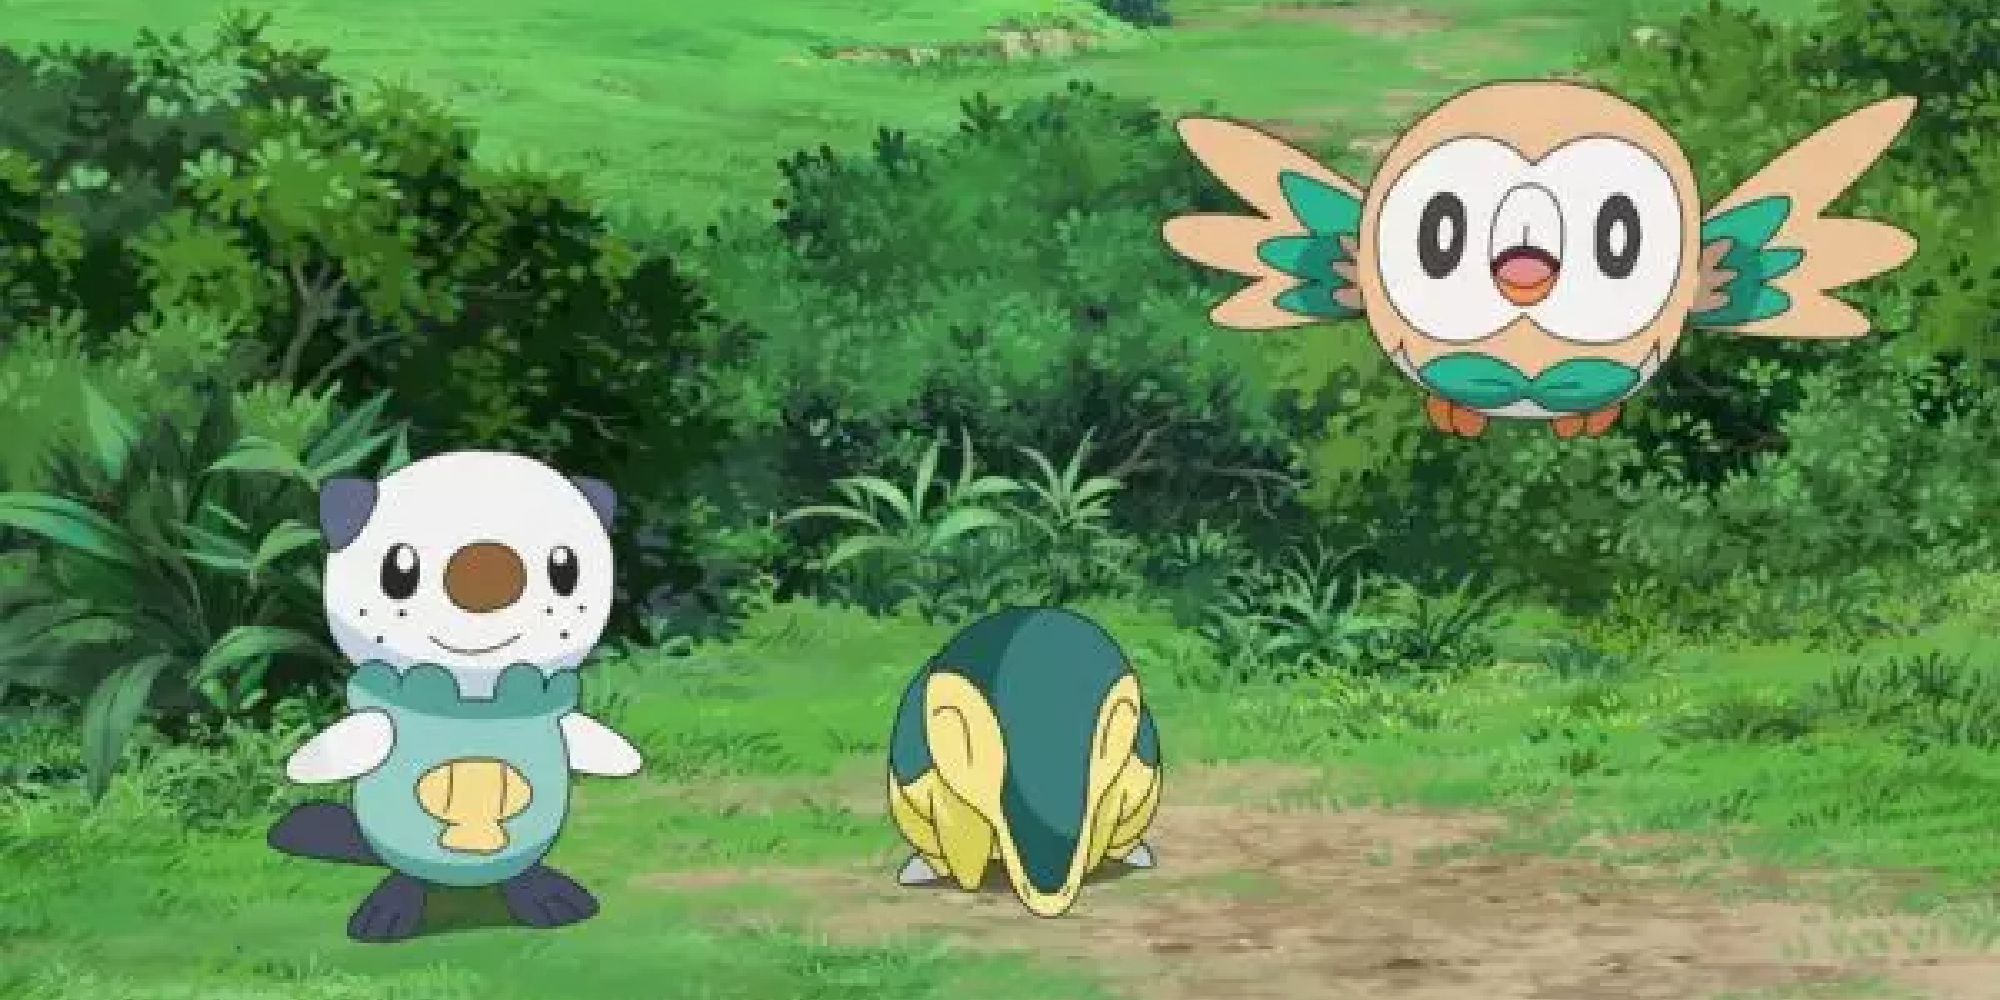 Oshawott, Cyndaquil, and Rowlet appearing at the Sinnoh festival